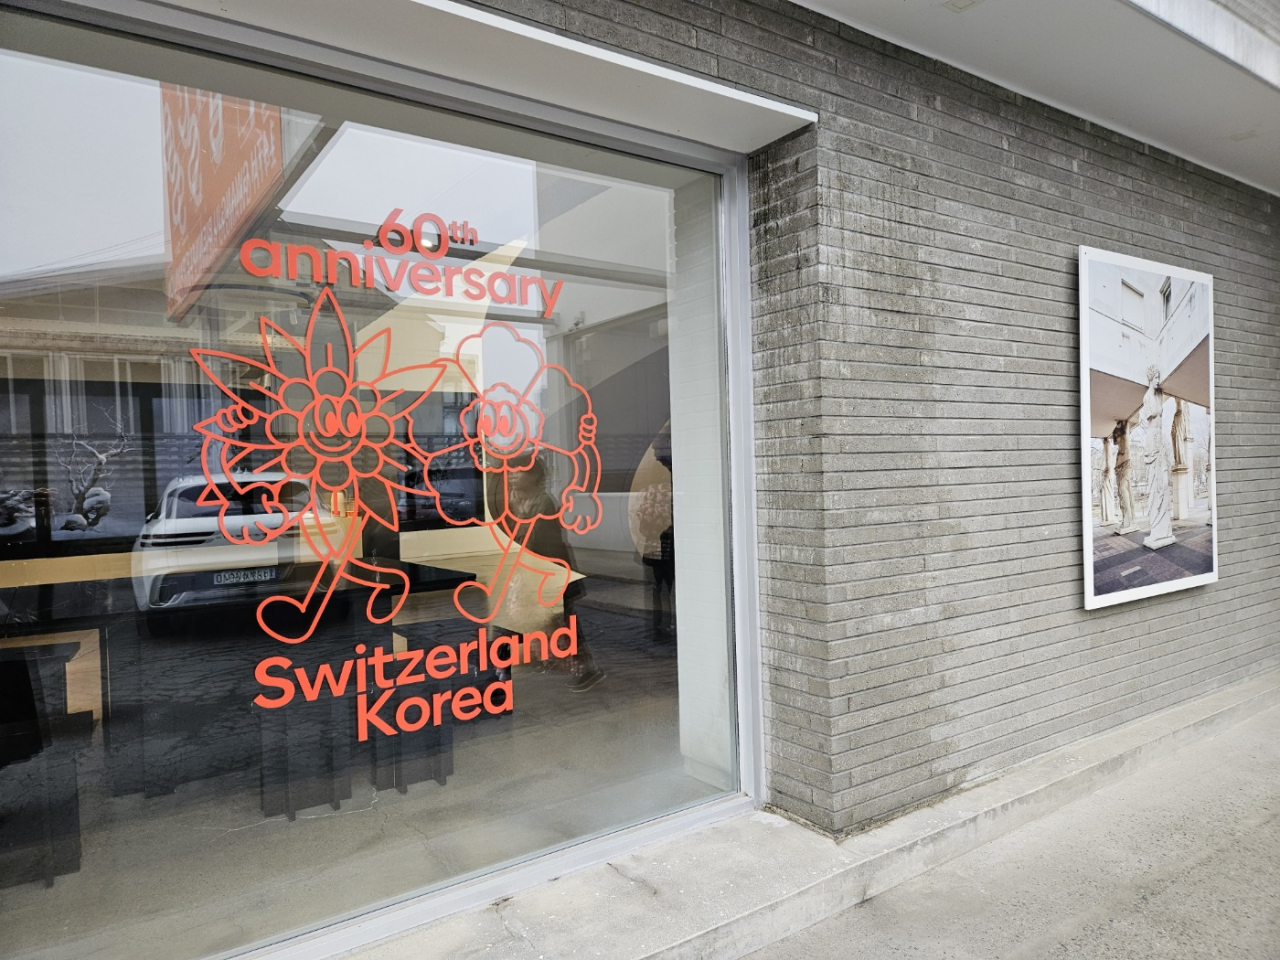 The Swiss Pavilion at the 14th Gwangju Biennale shows a logo commemorating diplomatic relations between Switzerland and South Korea. The logo features mugunghwa and edelweiss, the national flowers of South Korea and Switzerland, respectively. (Park Yuna/The Korea Herald)